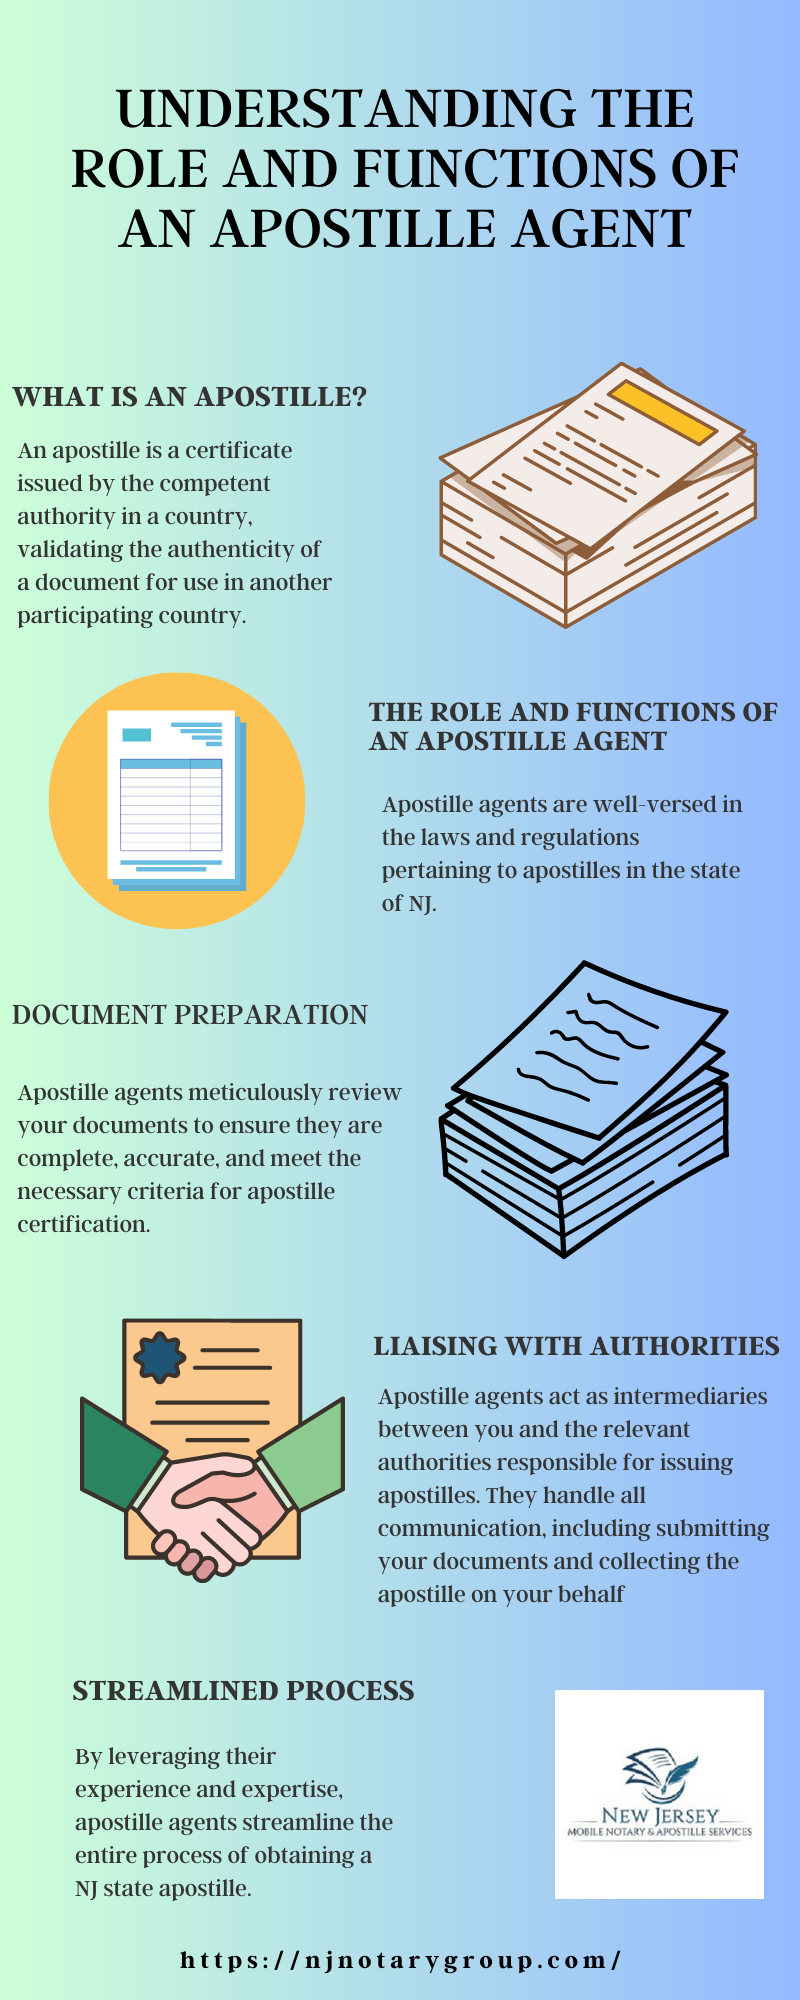 Understanding the Role and Functions of an Apostille Agent - ImgPaste.net